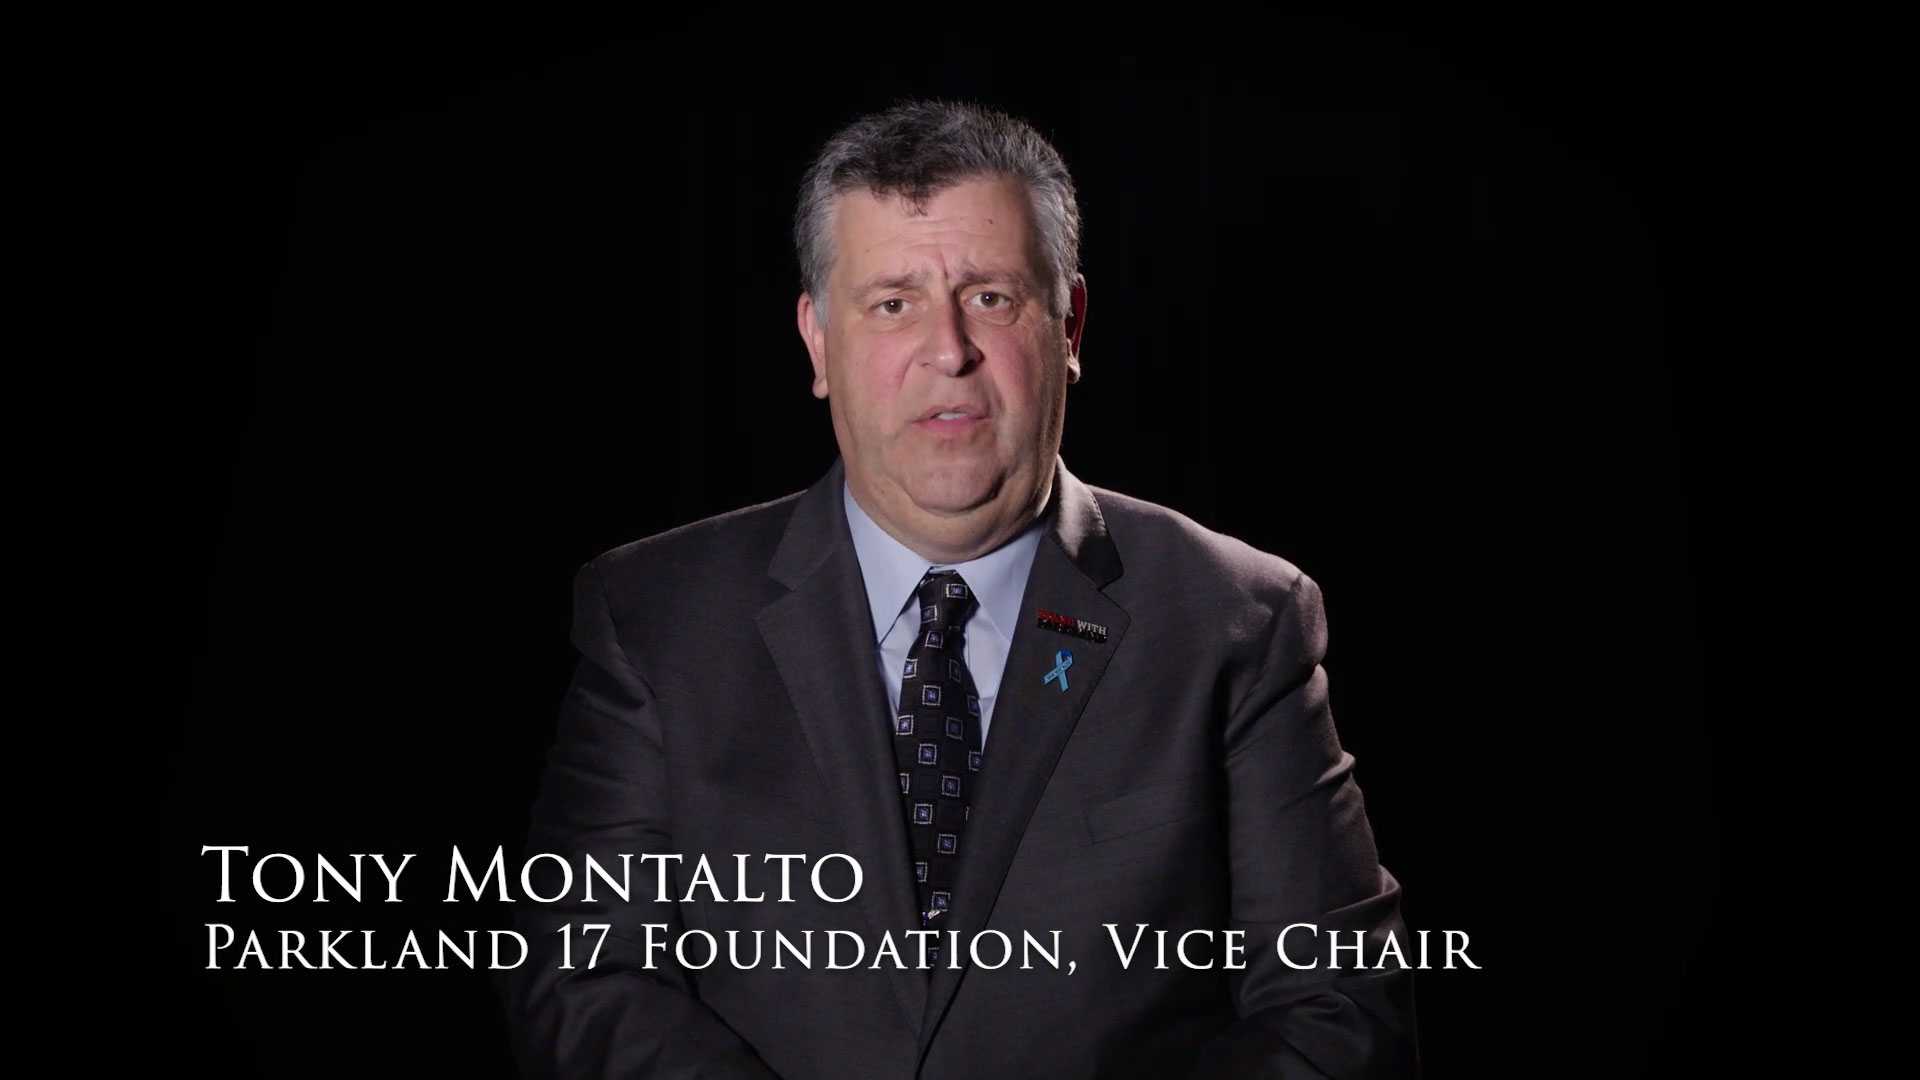 Tony Montalto, father of Gina Montalto who was one of the 17 who were taken too soon, five years ago, in the February 14, 2018 massacre, is Vice Chairman of the Parkland 17 Memorial Foundation. He is also the family liaison who keeps the other victims’ families updated. They are advised of the steps in the process and have direct input regarding creation of the Memorial.